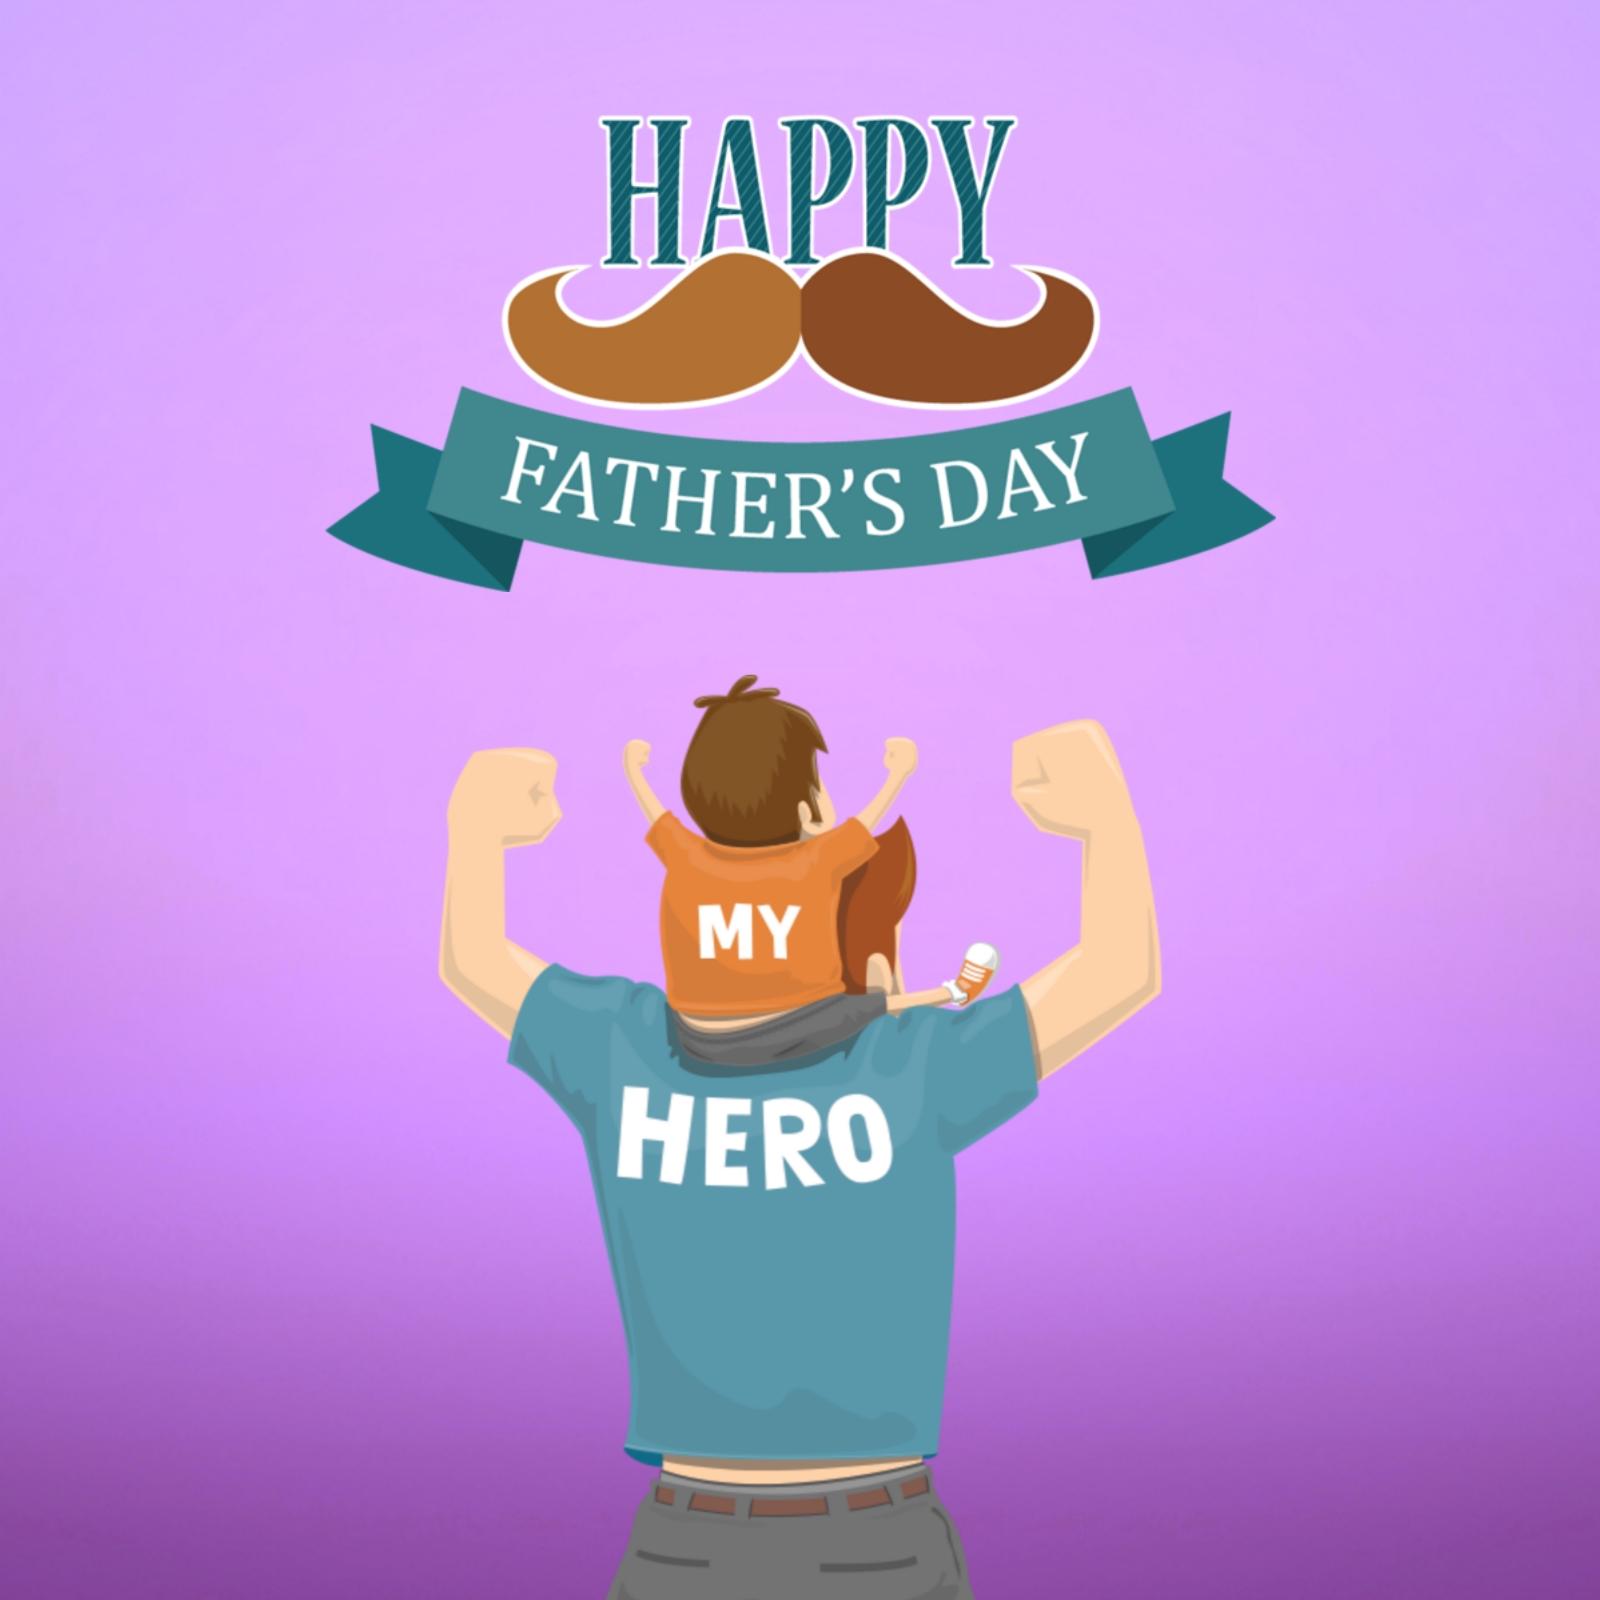 Happy Fathers Day My Hero Image Hd Download